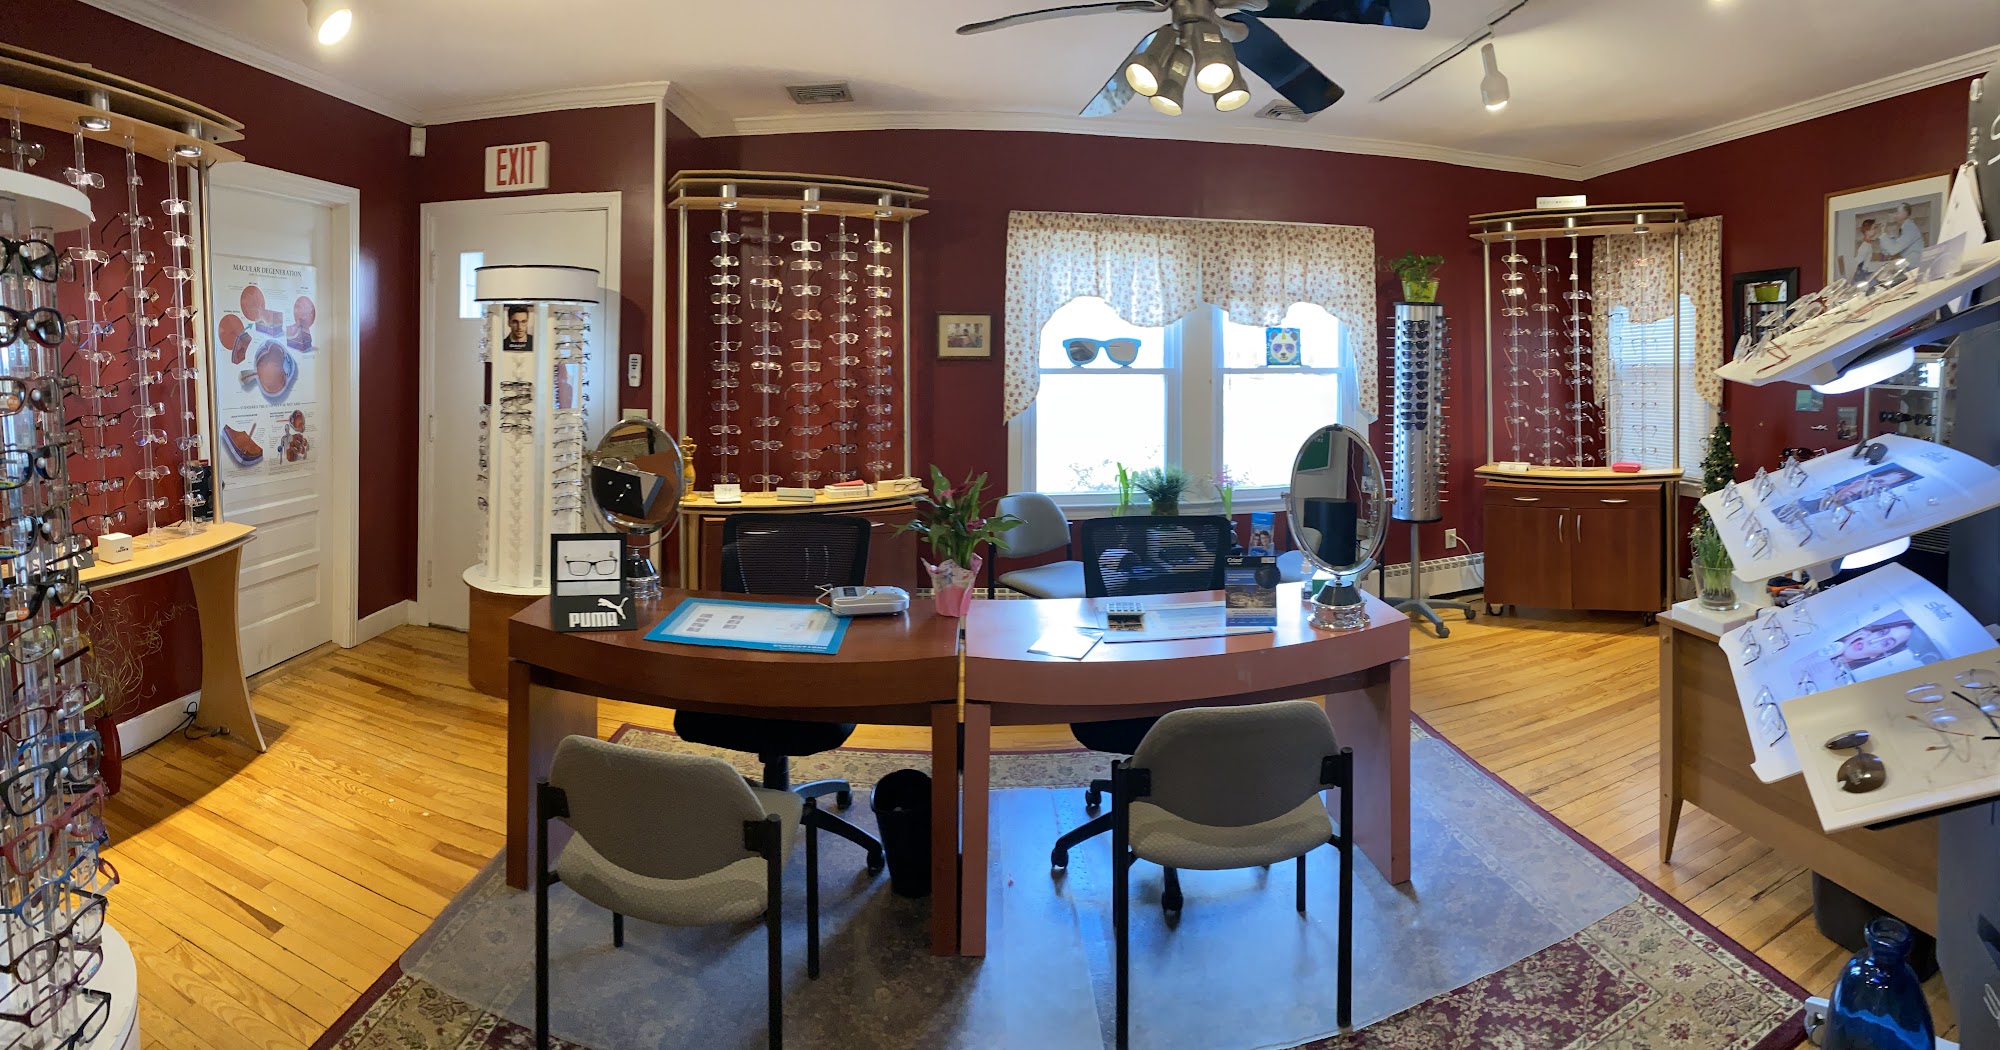 Granby Family Eye Care LLC 355 Salmon Brook St, Granby Connecticut 06035